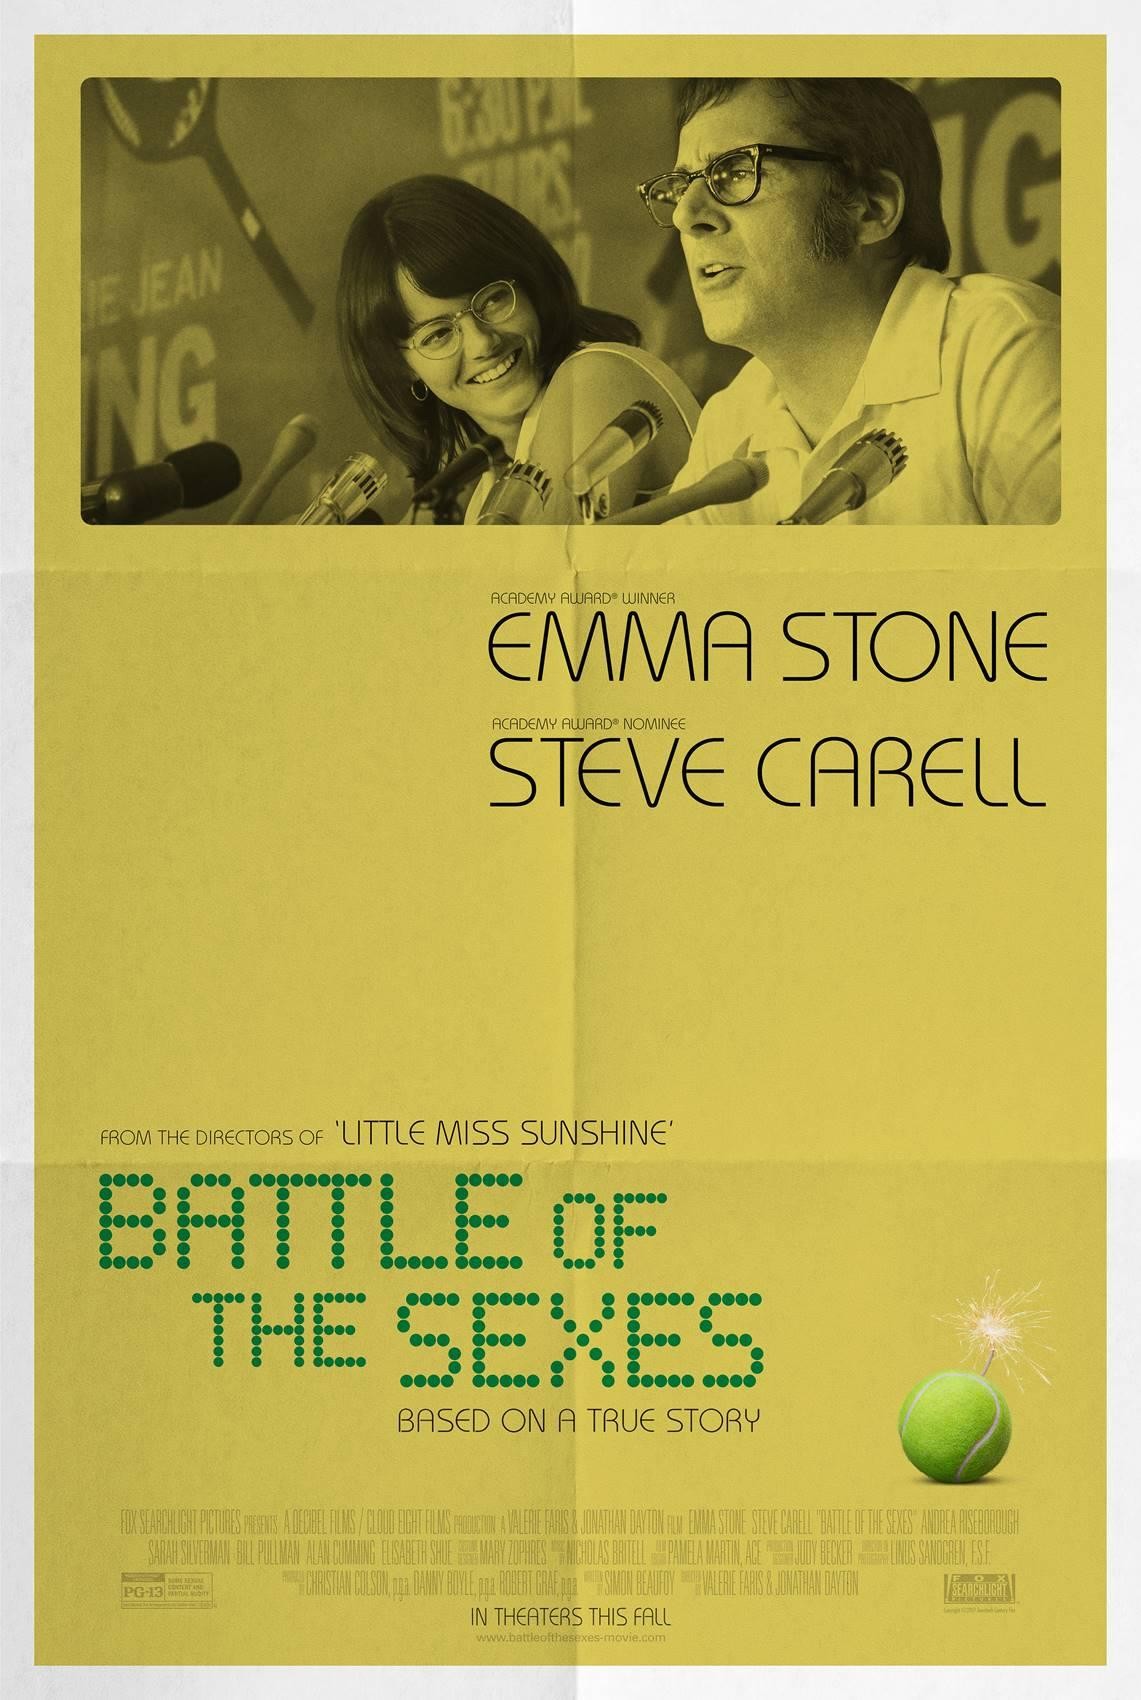 AP Was There: Battle of the Sexes